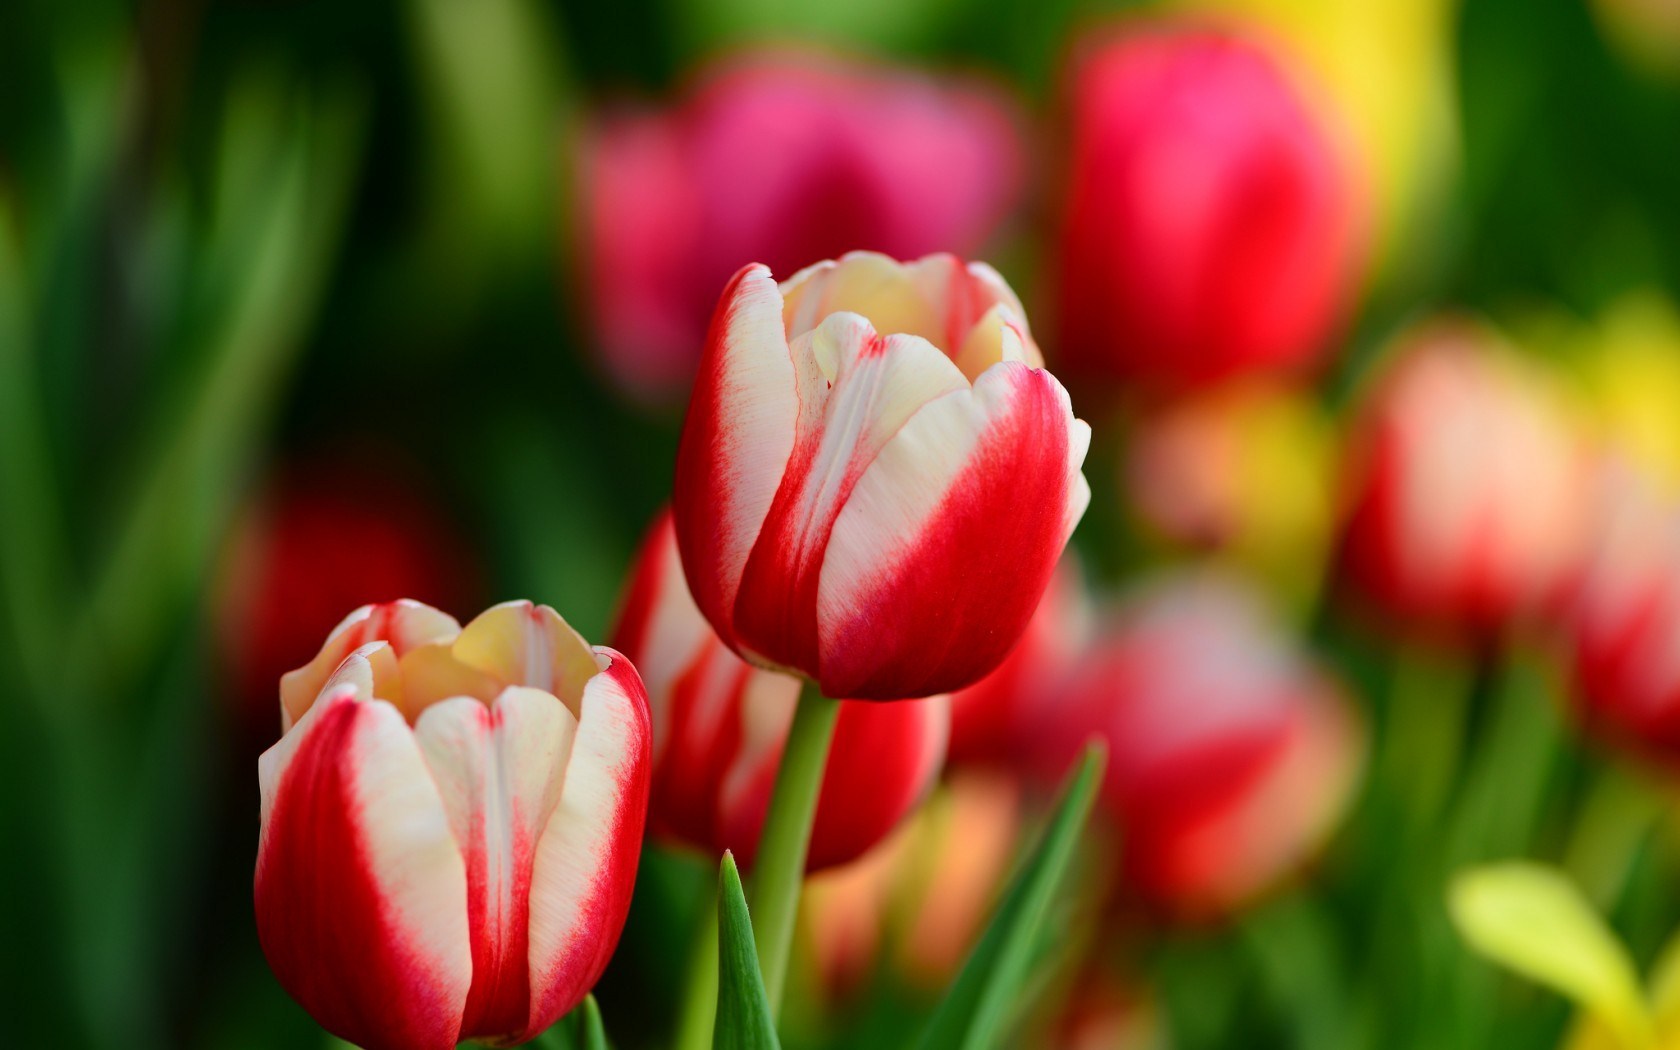 Tulips Red and White Leaves Flowers Spring